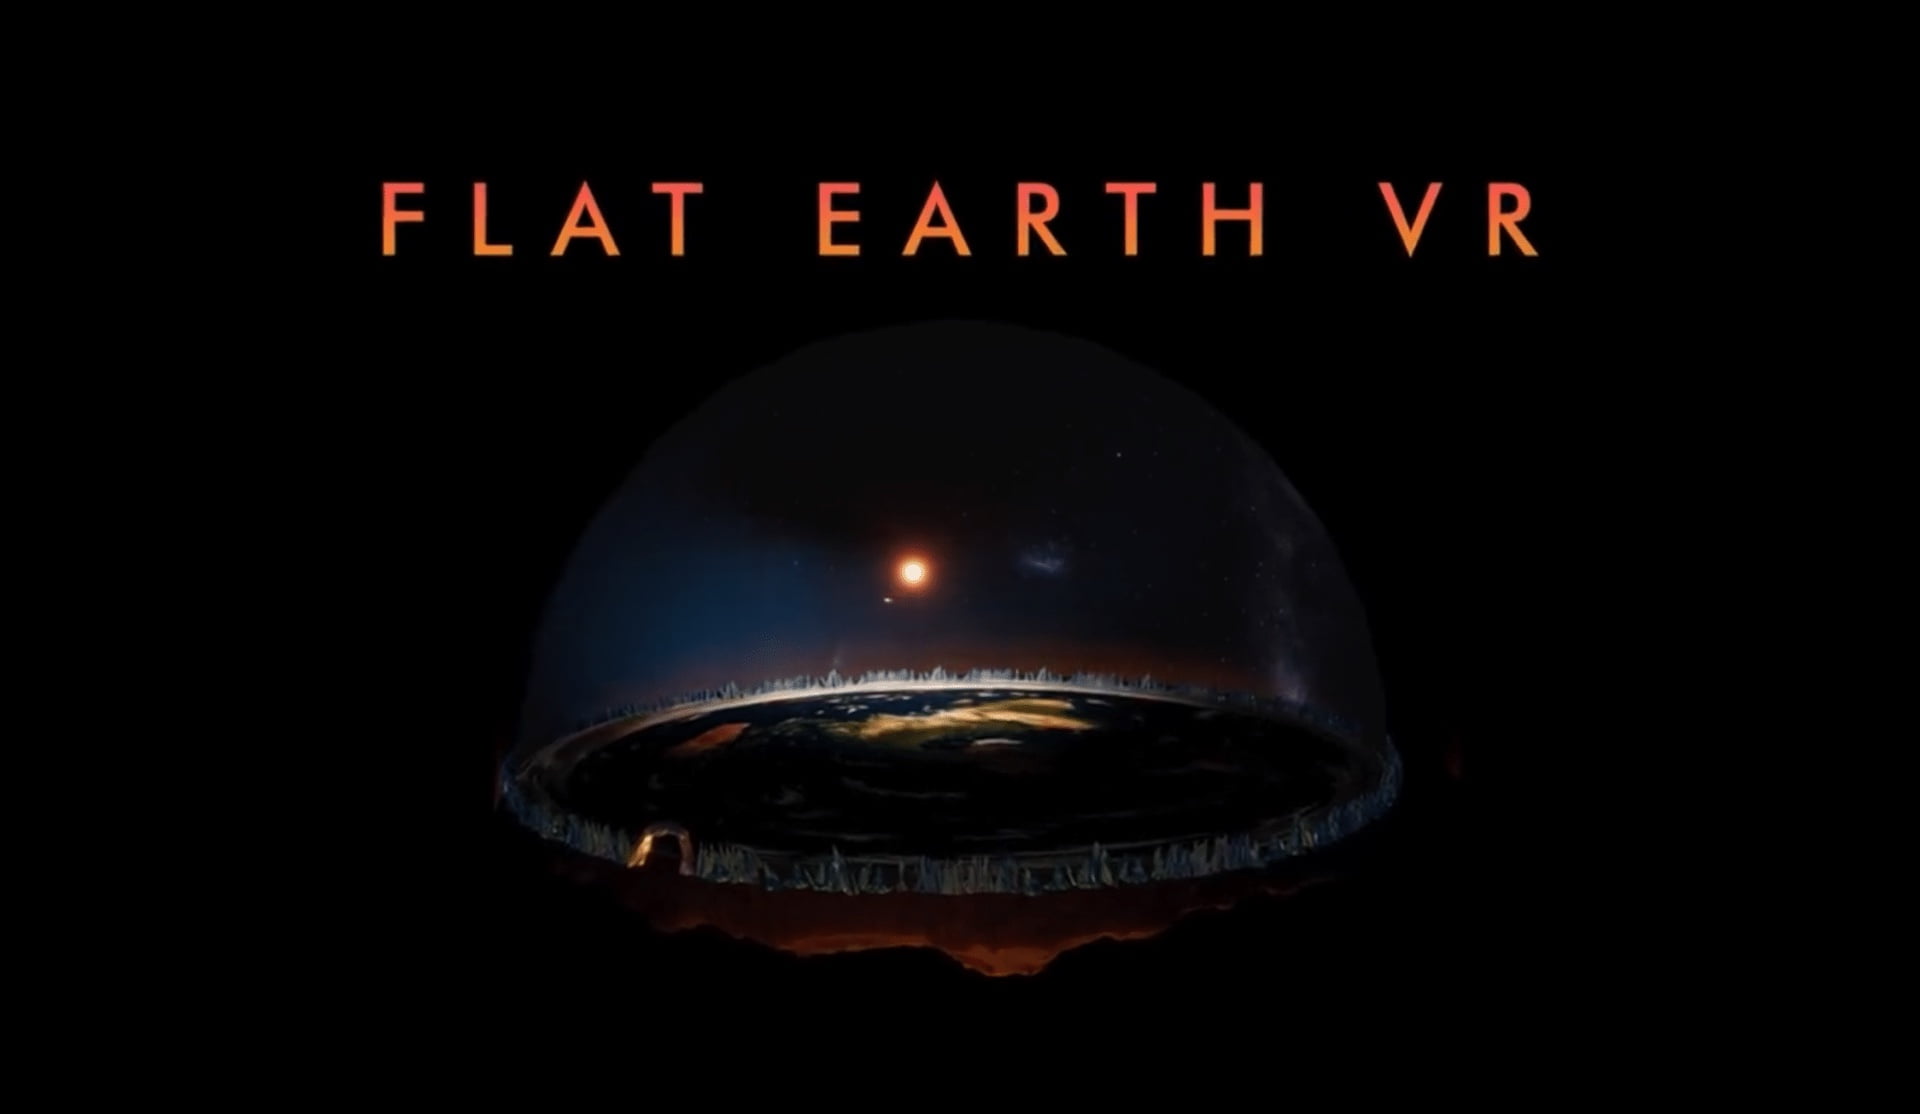 Flat Earth VR: New VR game is the “ultimate flat earth fantasy”